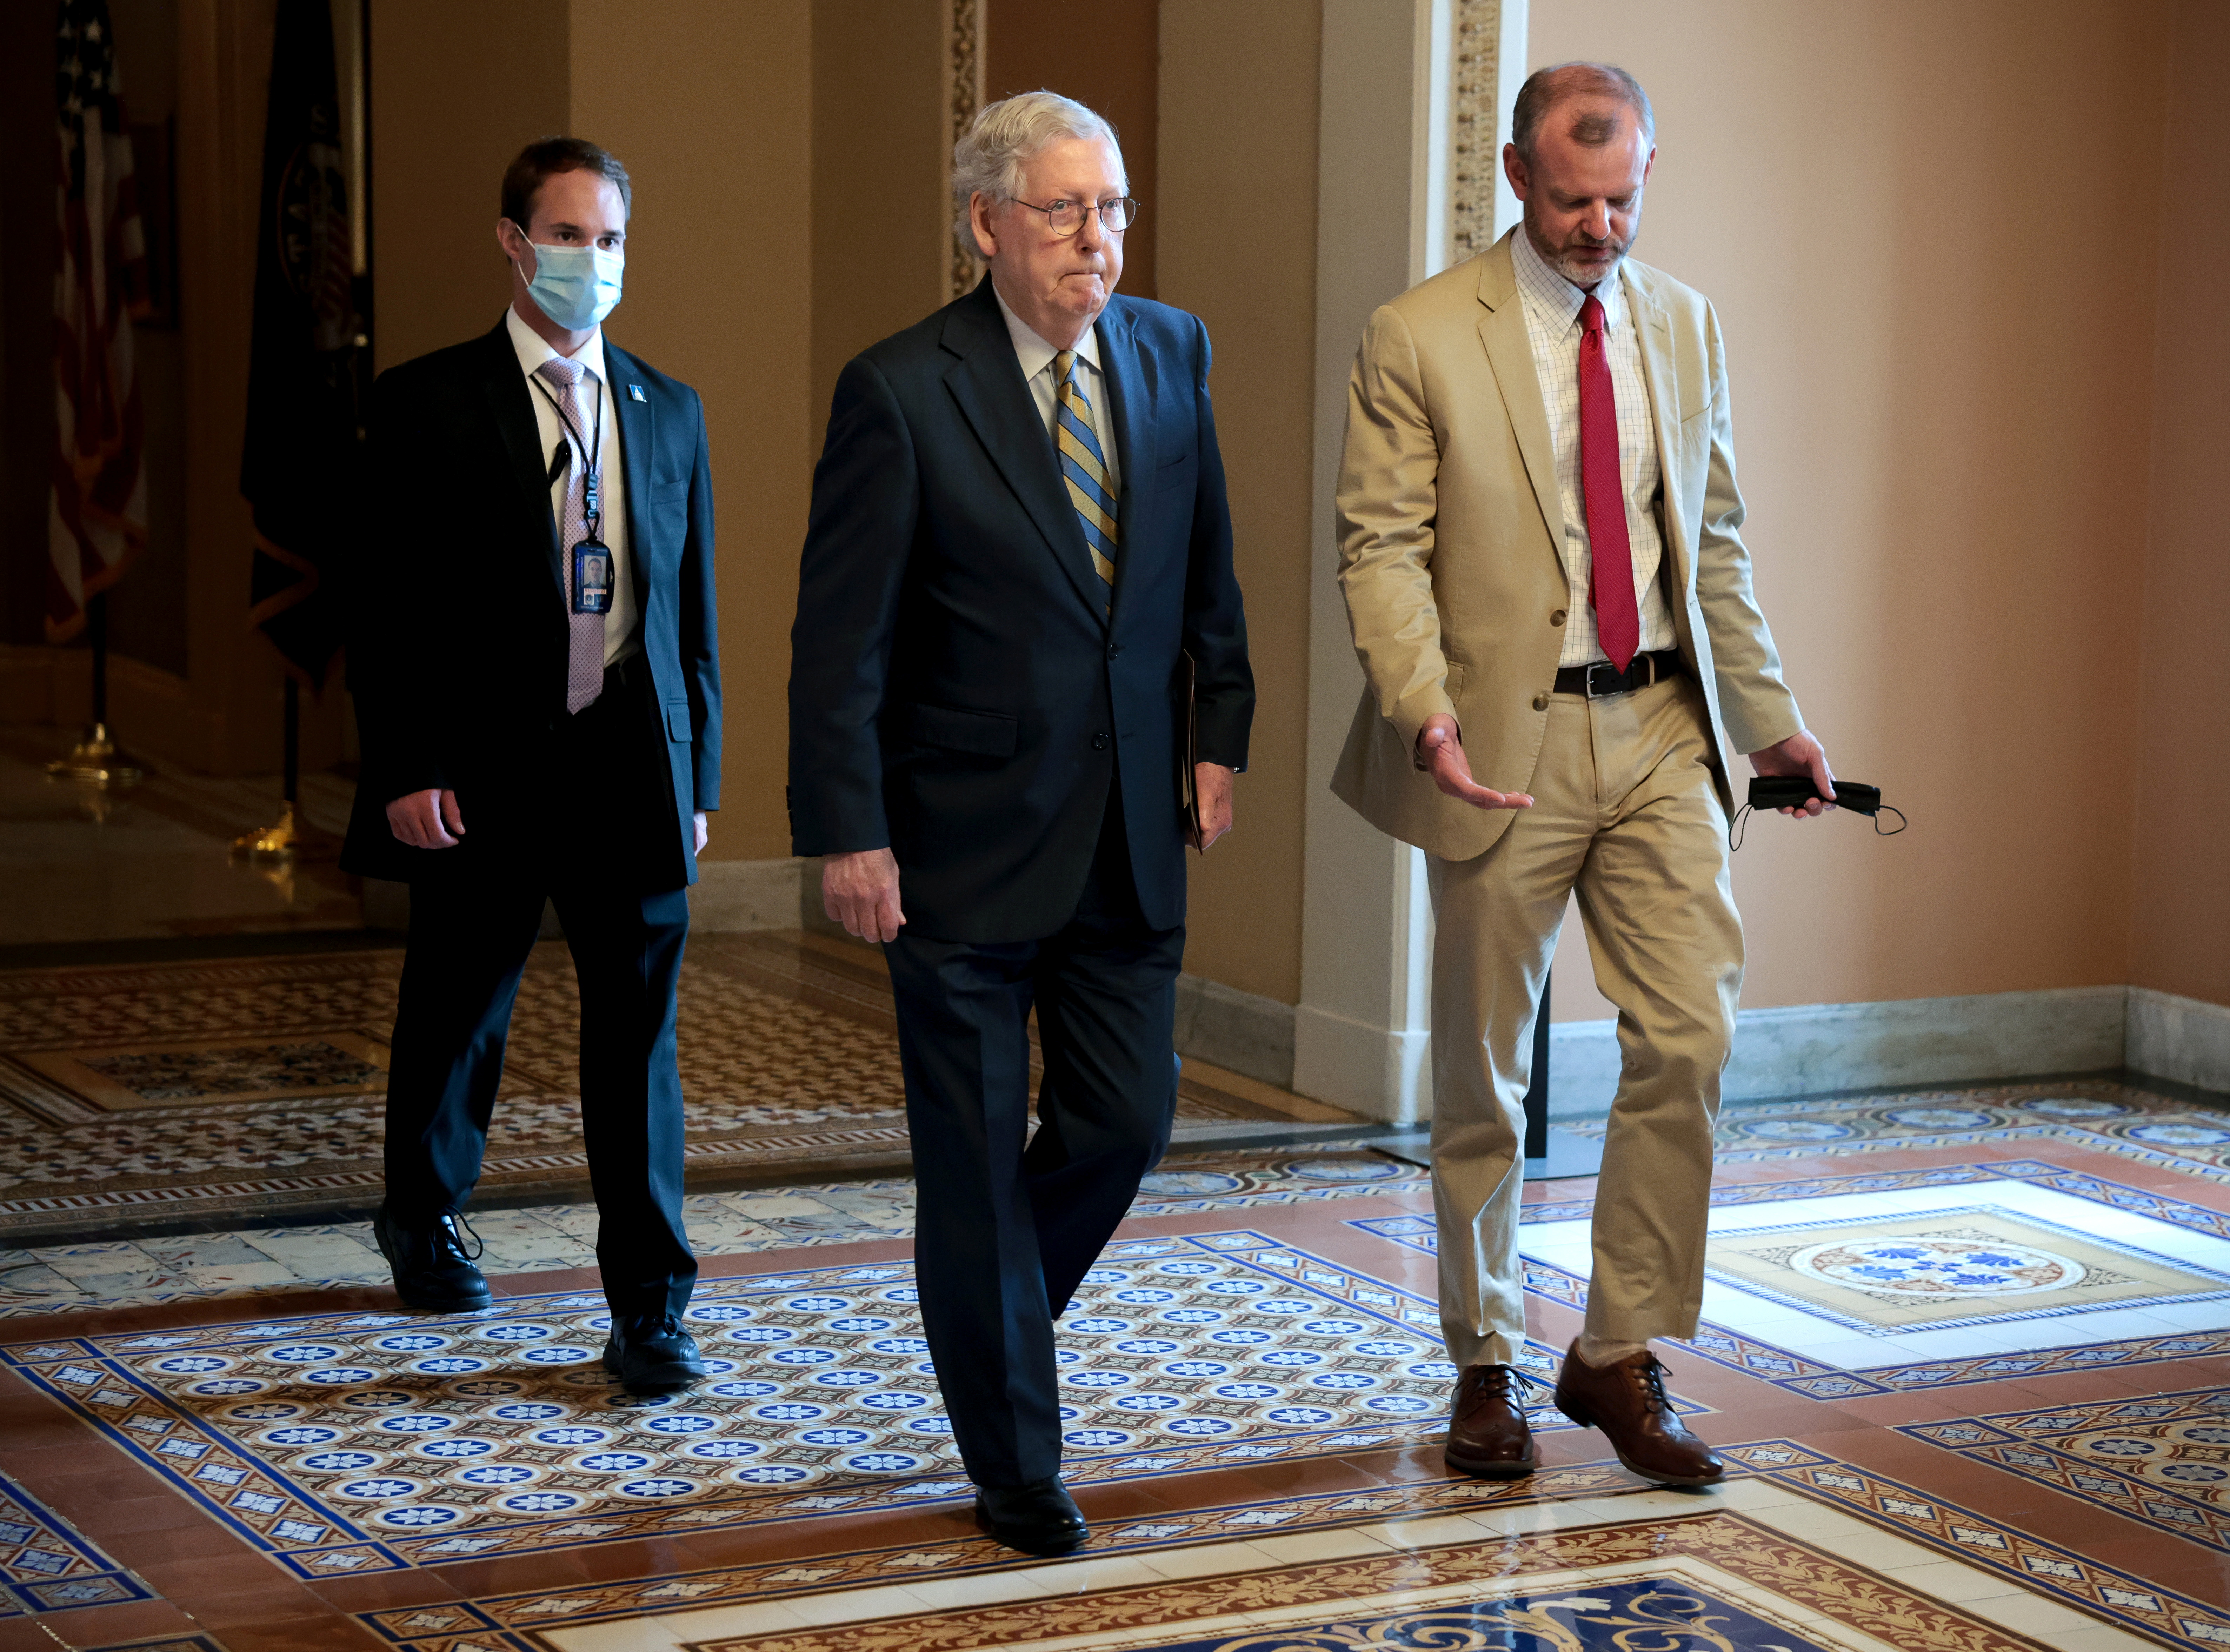 Senate Minority Leader Mitch McConnell (R-KY) at the U.S. Capitol in Washington, U.S.